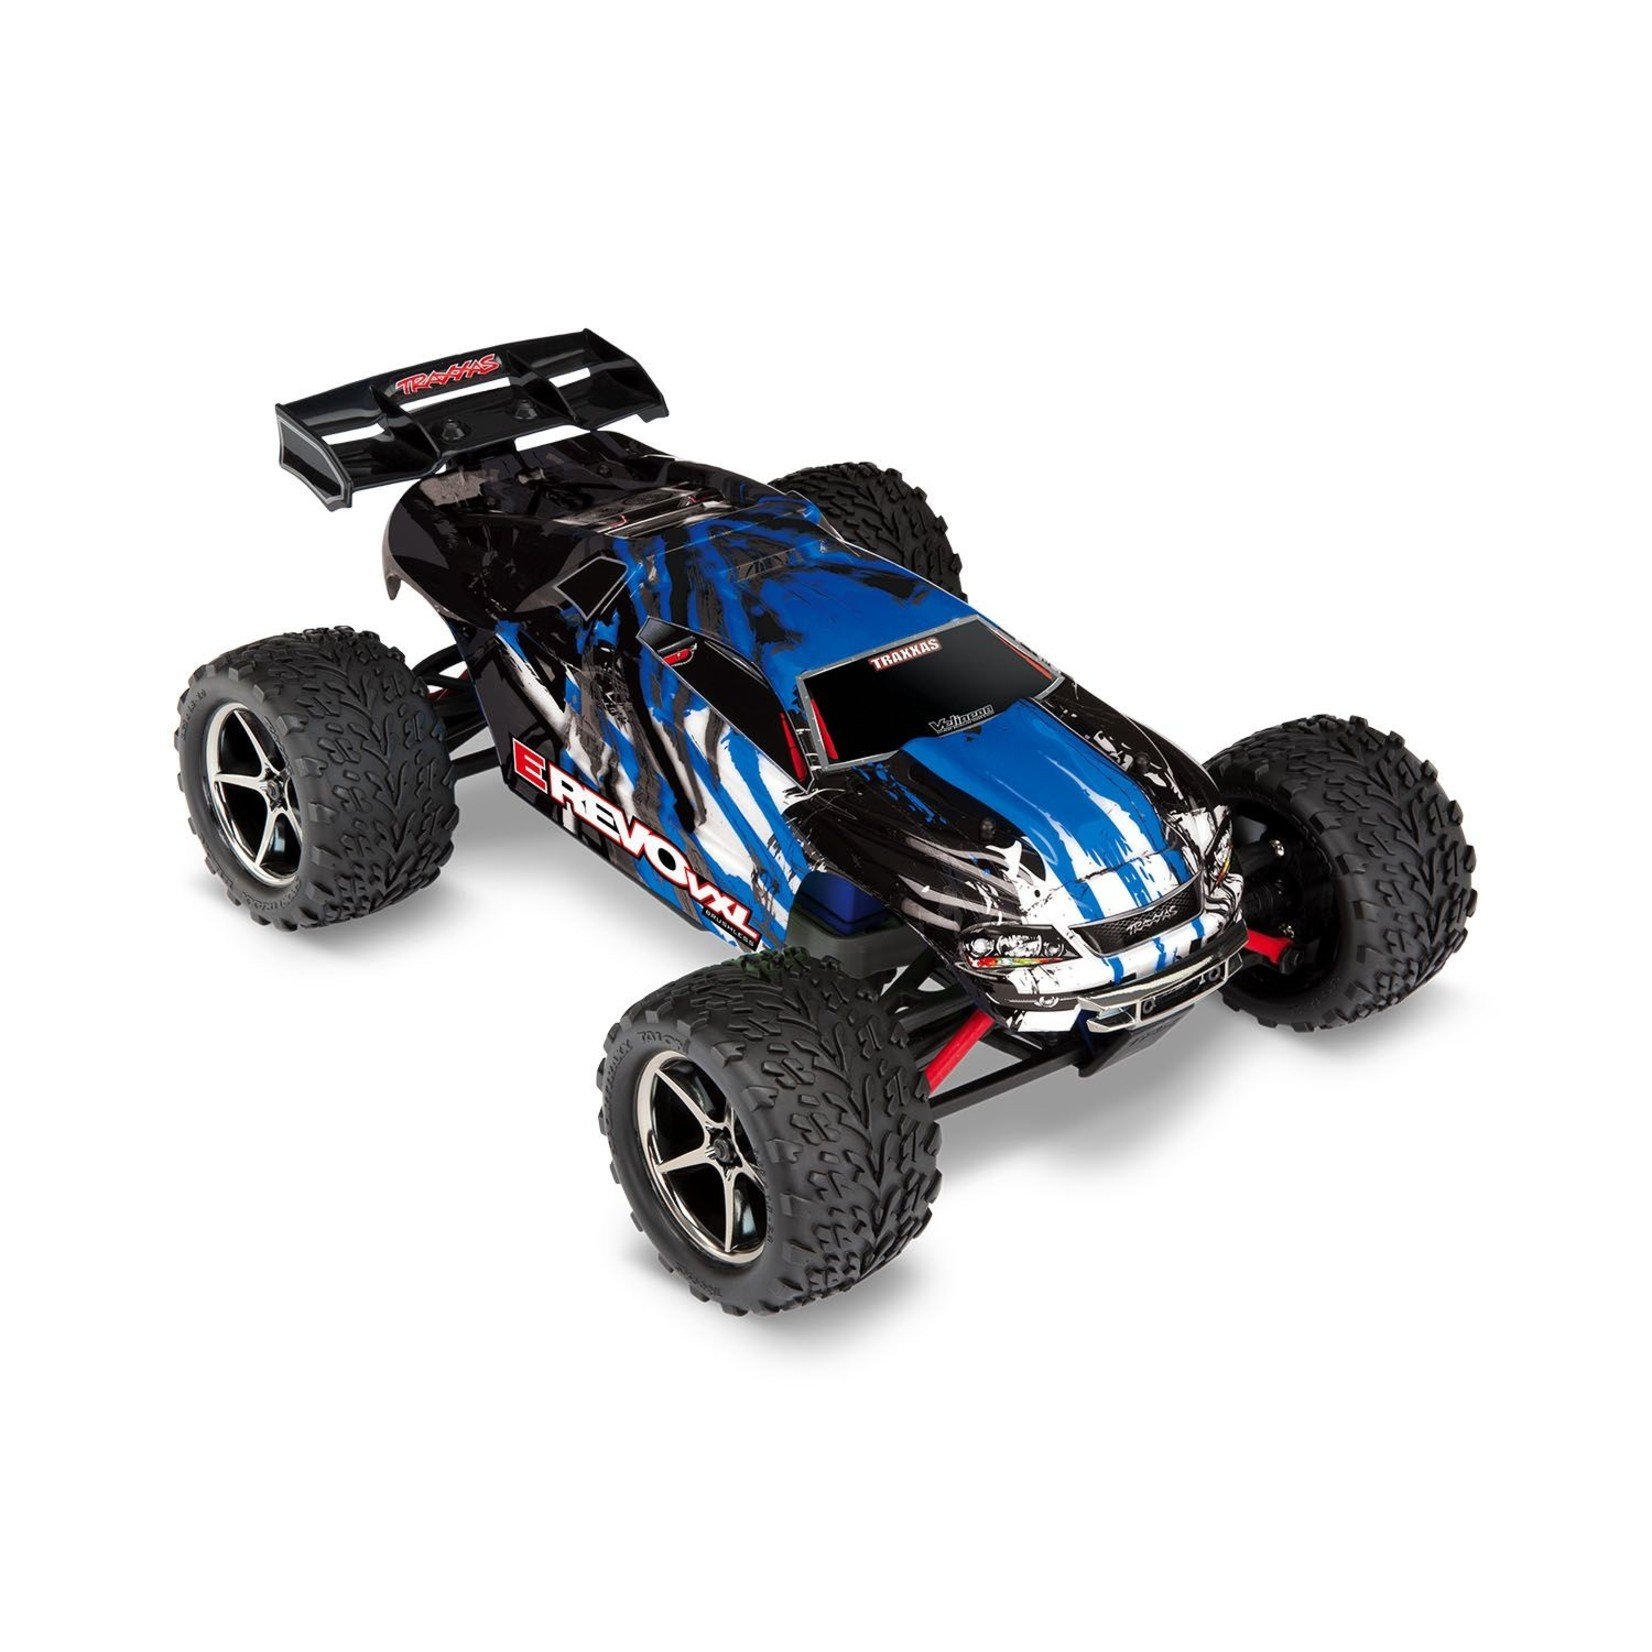 Traxxas 71076-3-BLUEX  E-Revo® VXL: 1/16-Scale 4WD Racing Monster Truck with TQi™ Traxxas Link™ Enabled 2.4GHz Radio System & Traxxas Stability Management (TSM)®